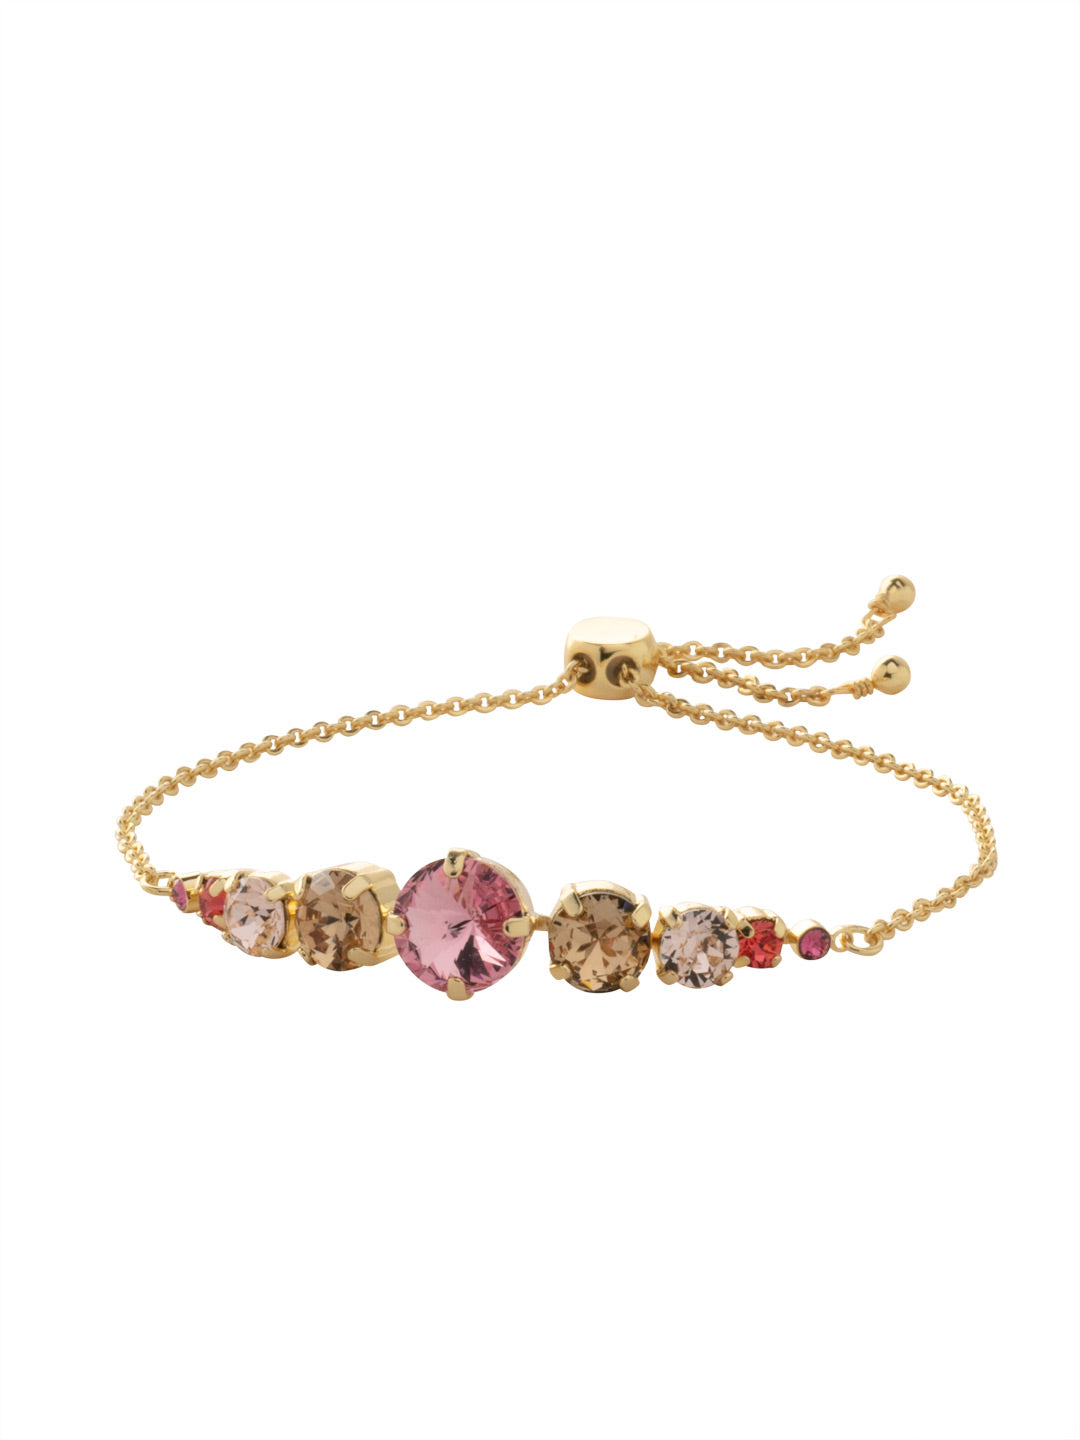 London Slider Bracelet - BCQ140BGFSK - <p>Slip on the London Slider Bracelet and adjust to your perfect fit. It's just the piece when you're looking to bling it on with some crystal sparkle. From Sorrelli's First Kiss collection in our Bright Gold-tone finish.</p>